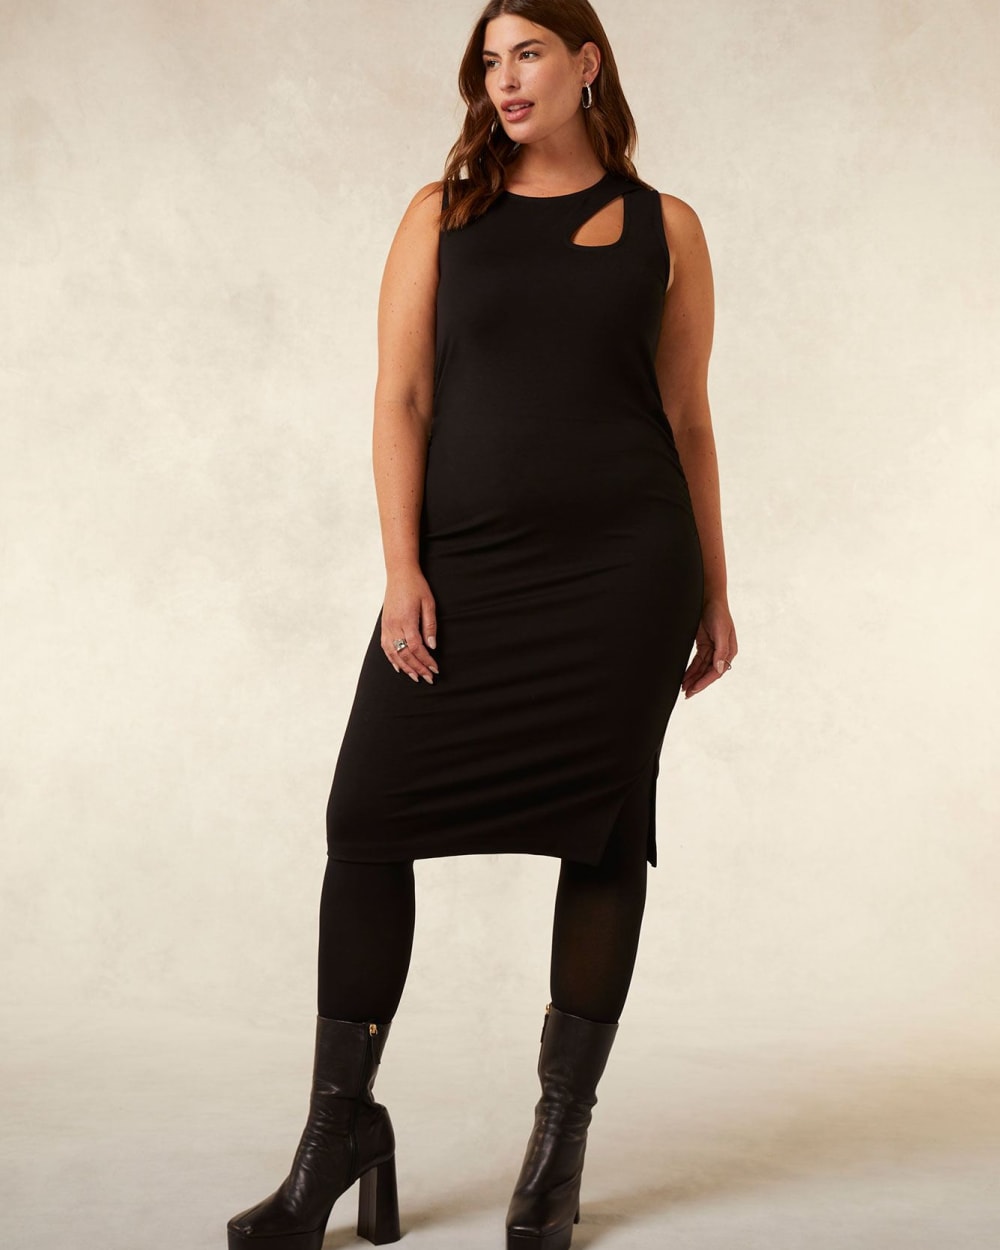 Black Sleeveless Knit Dress with Front Cutout - Addition Elle